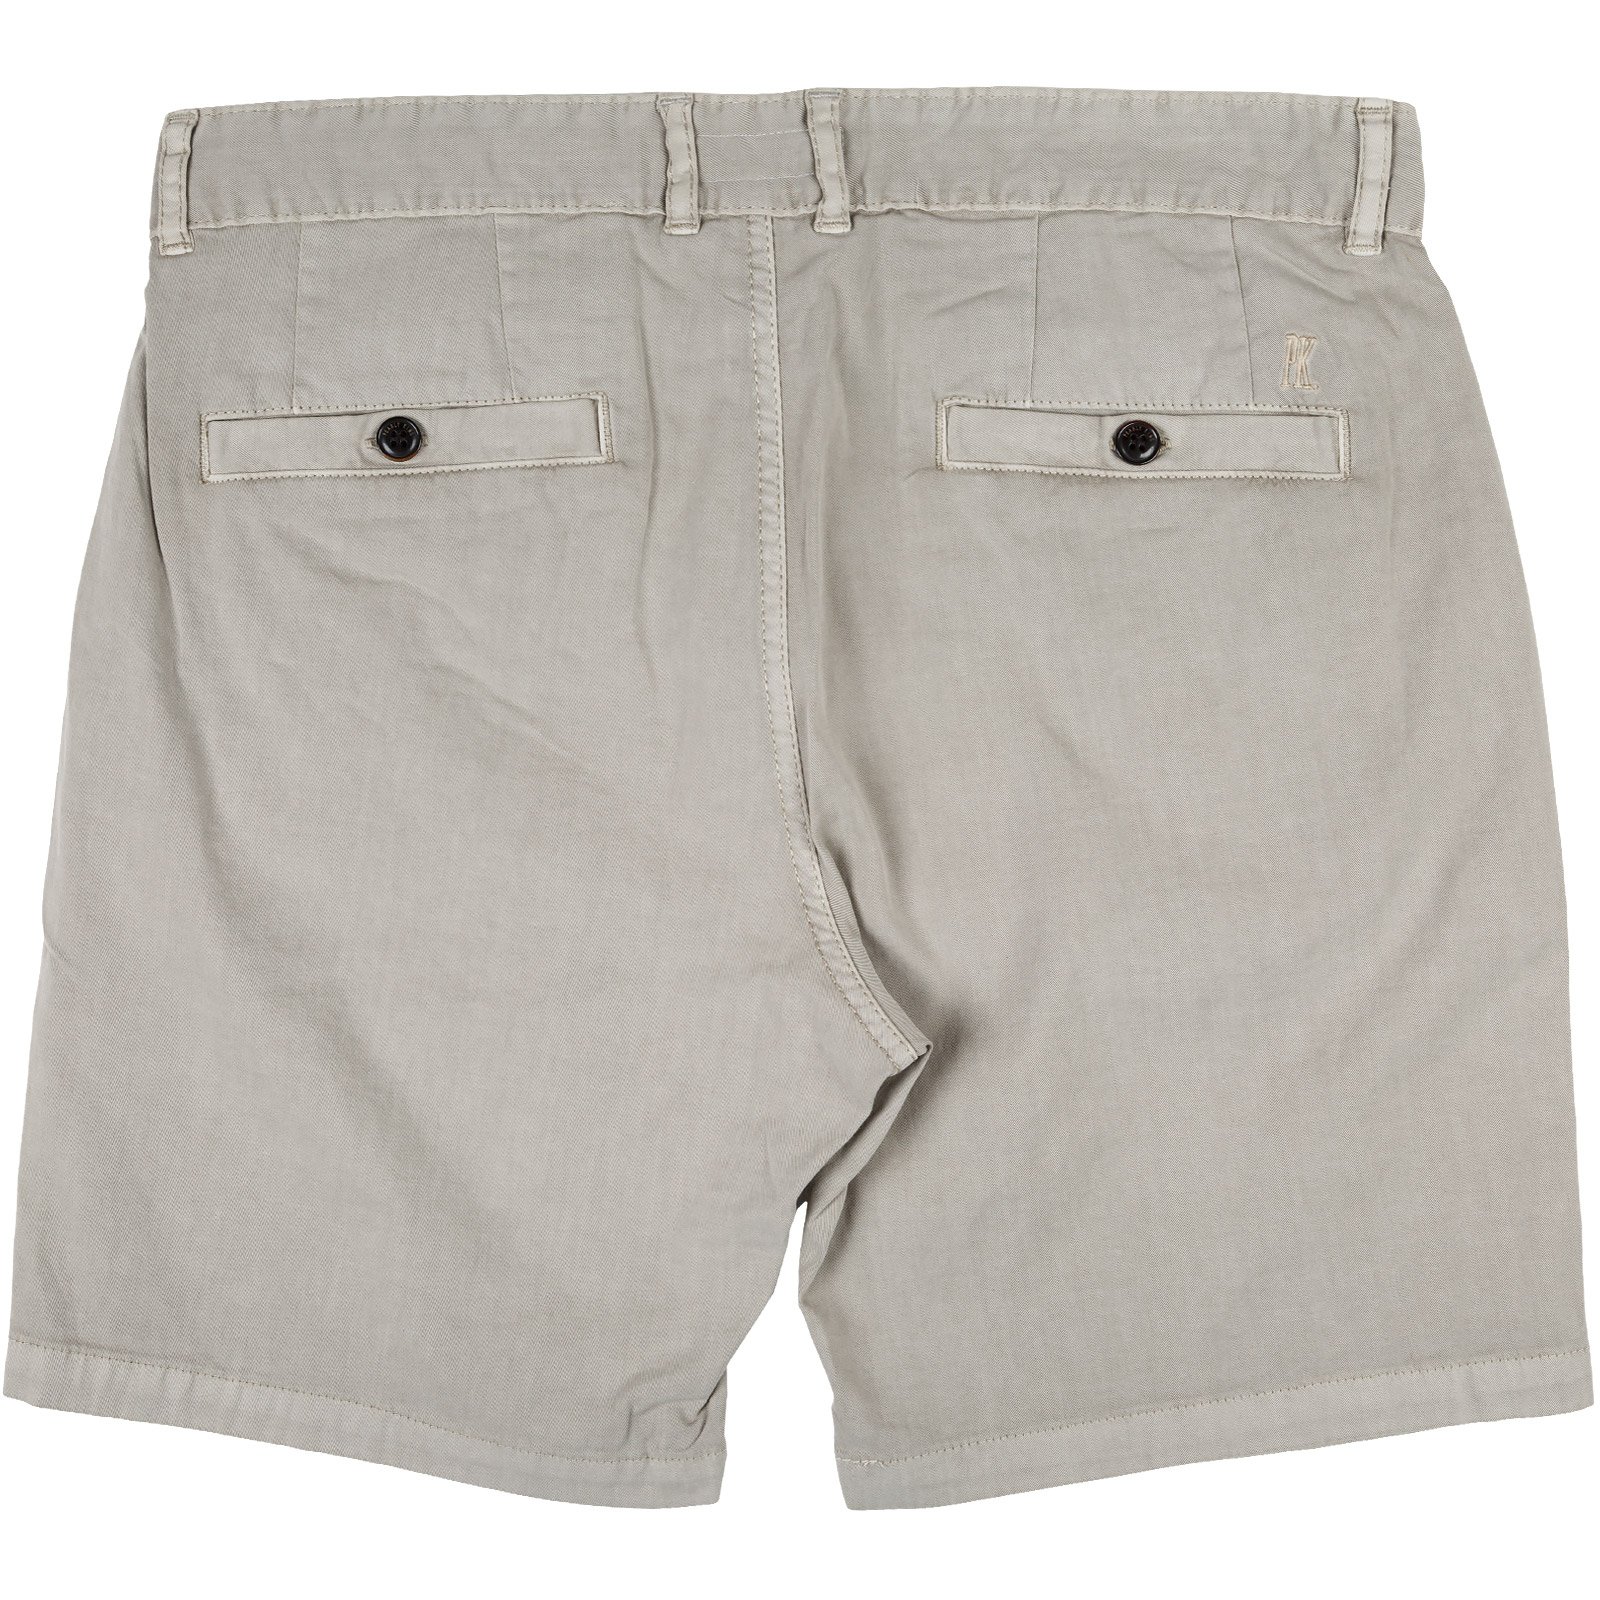 Blair Stretch Cotton Chino Shorts - Shorts : FA2 Online Outlet Store ...